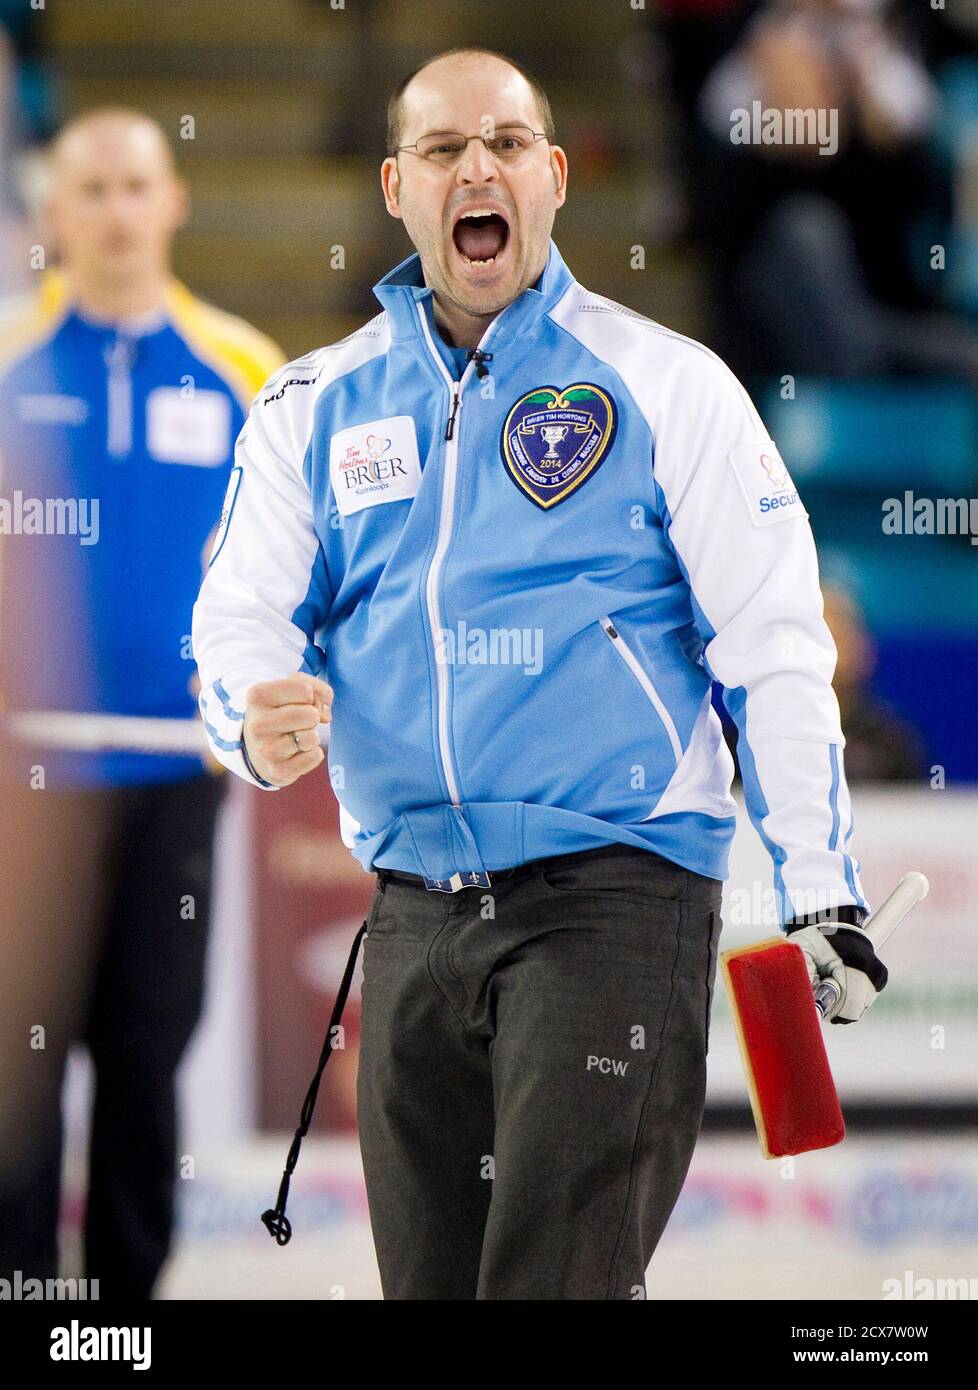 Team Quebec skip Jean-Michel Menard celebrates defeating team Alberta after  their draw during the 2014 Tim Hortons Brier curling championships in  Kamloops, British Columbia March 7, 2014. REUTERS/Ben Nelms (CANADA - Tags: